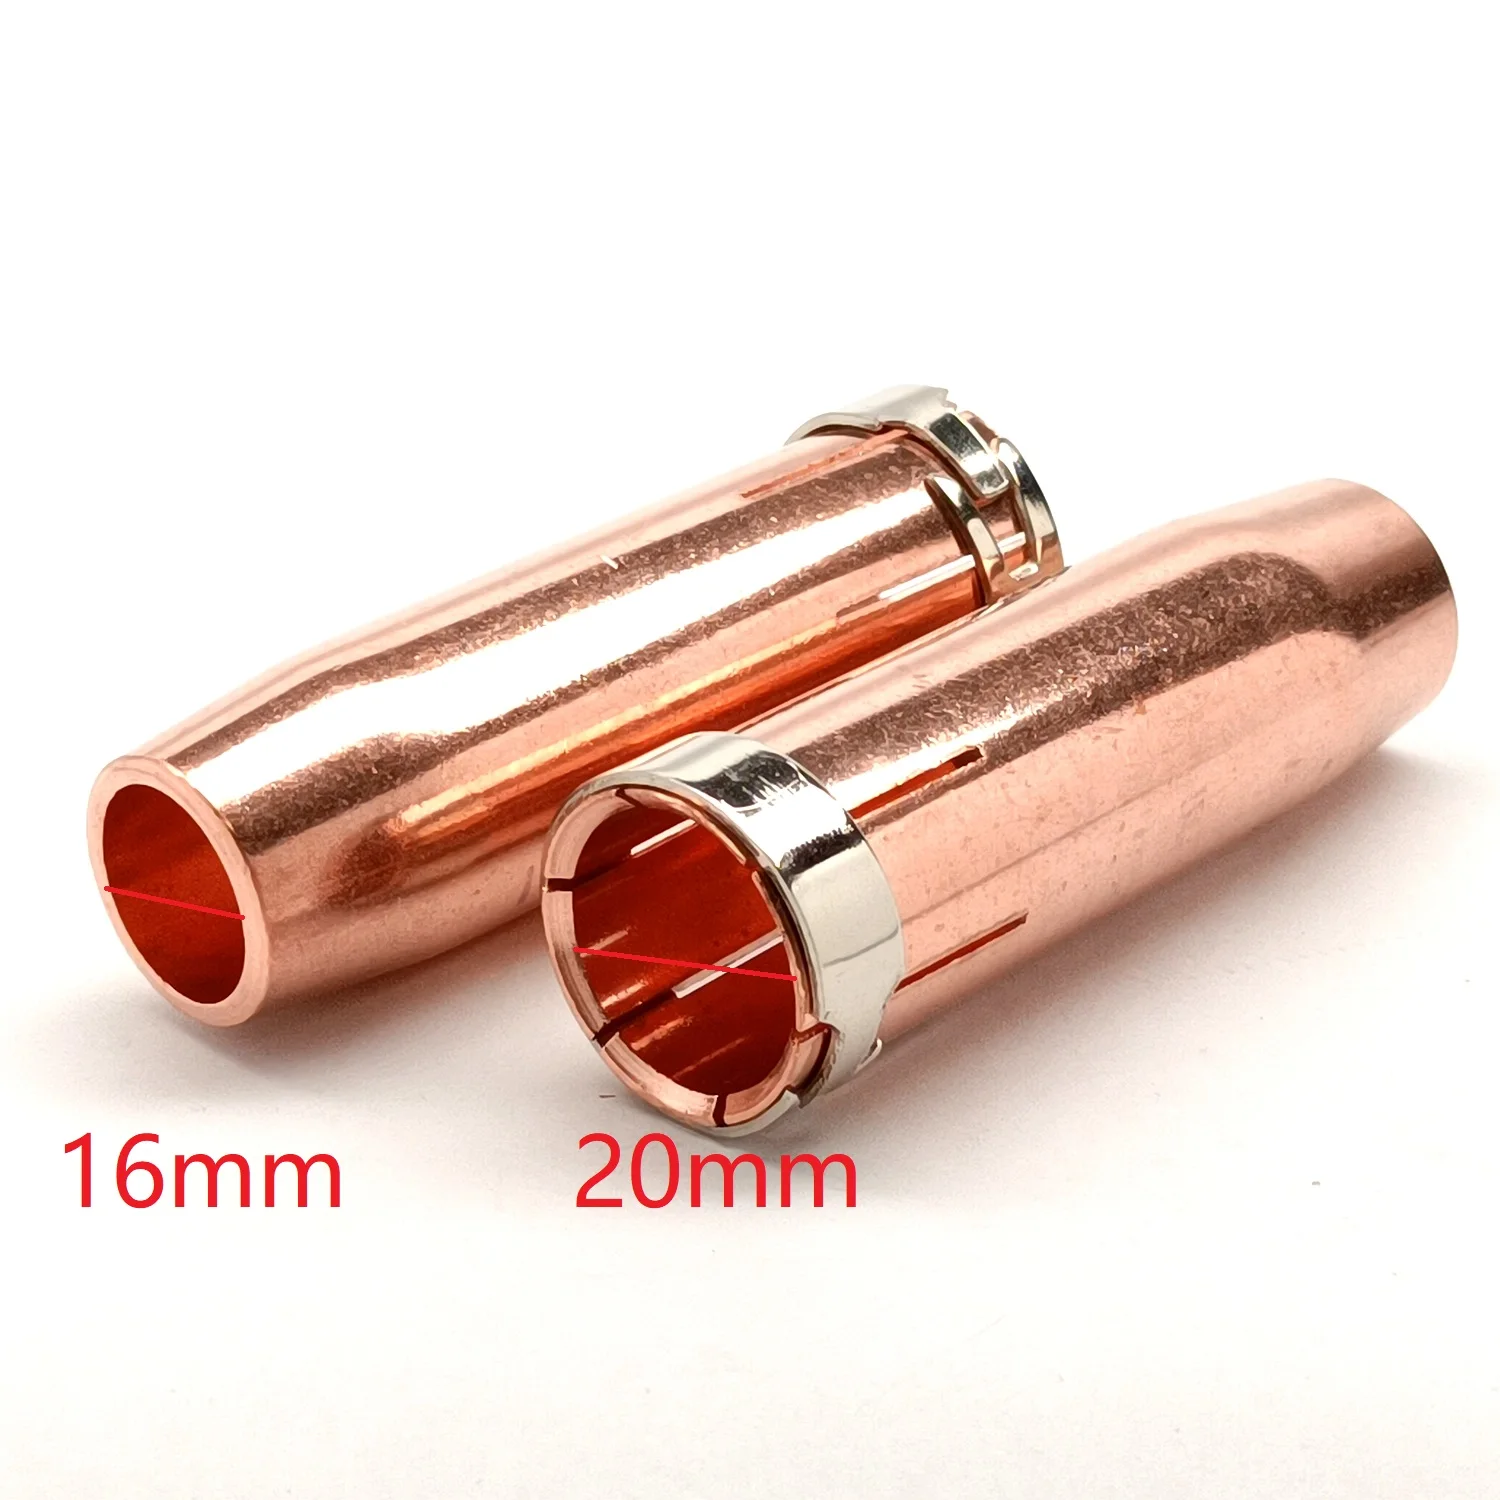 145.0085 MB 401 501 401D 501D Mig Torch Gun Conical STD Nozzle Shield Water Cooled 500A Red Copper